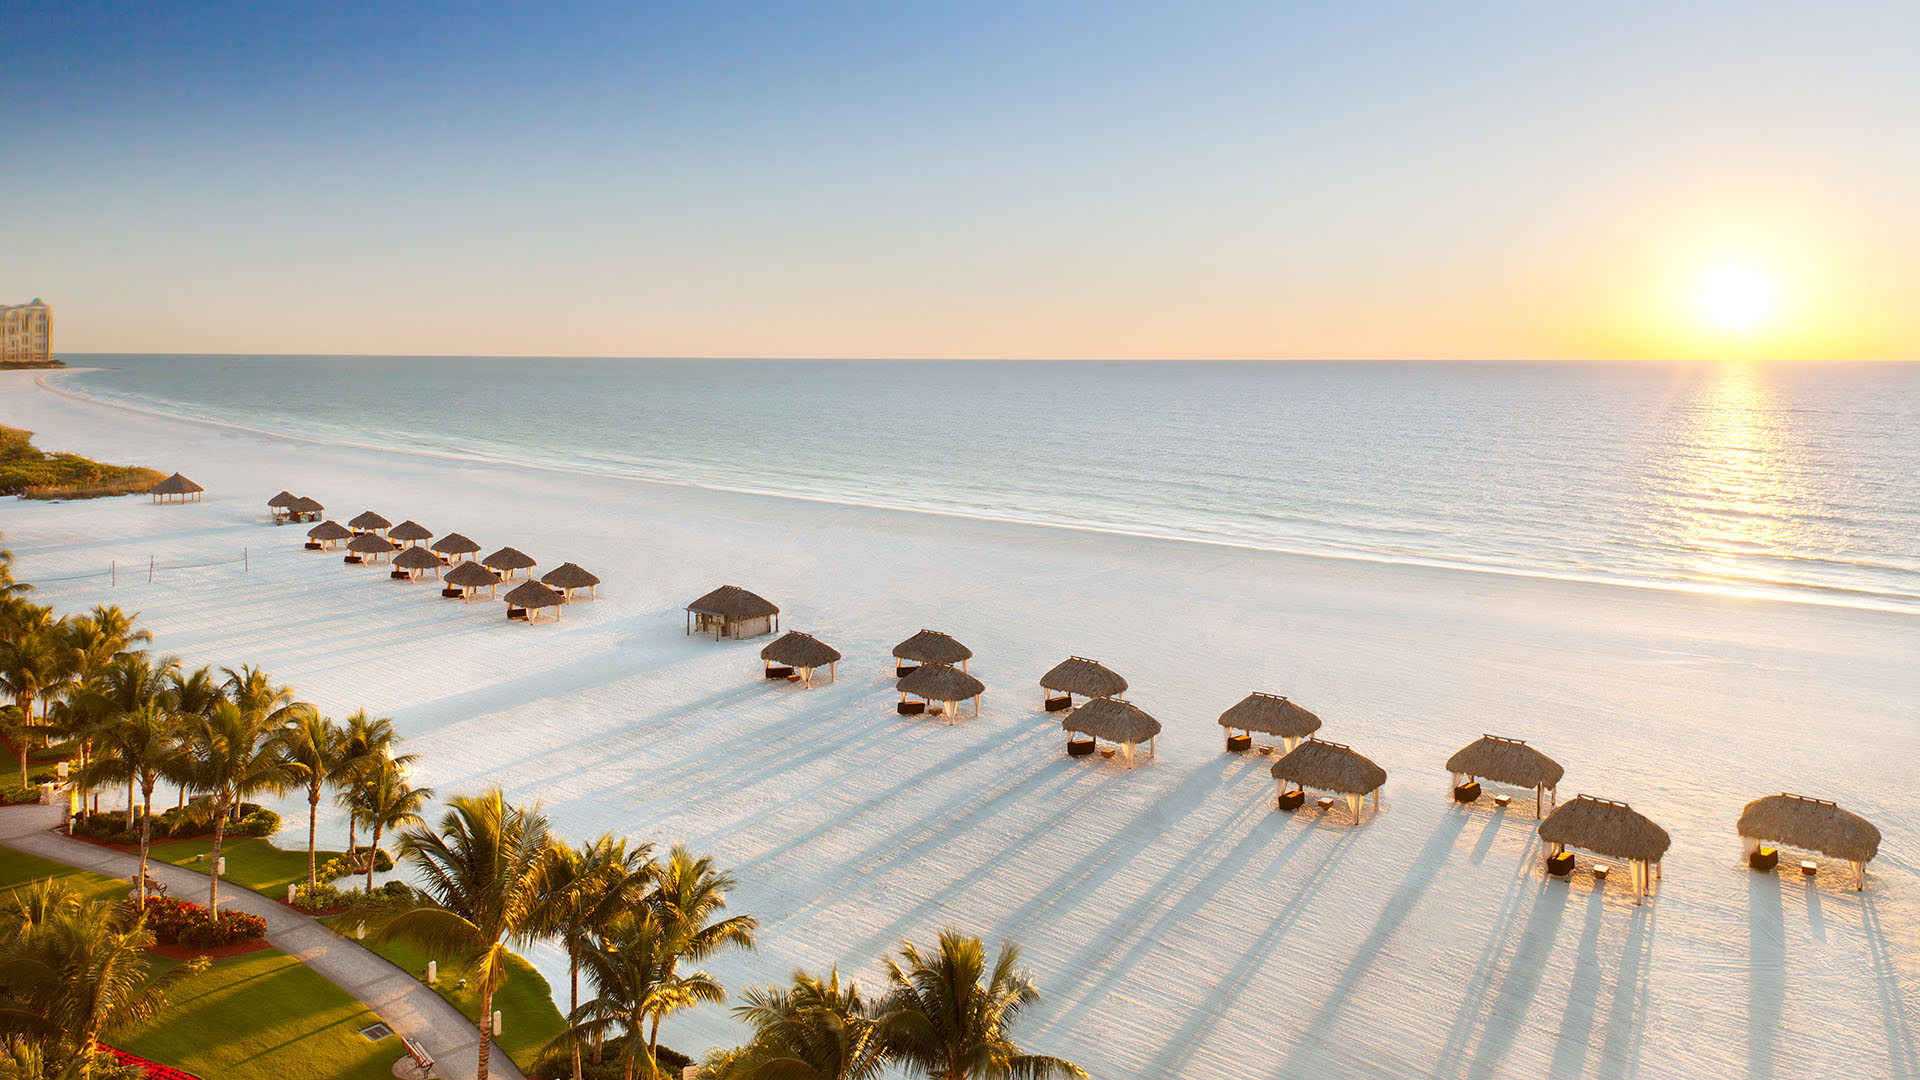 Beach cabanas at sunset at the JW Marriott Marco Island